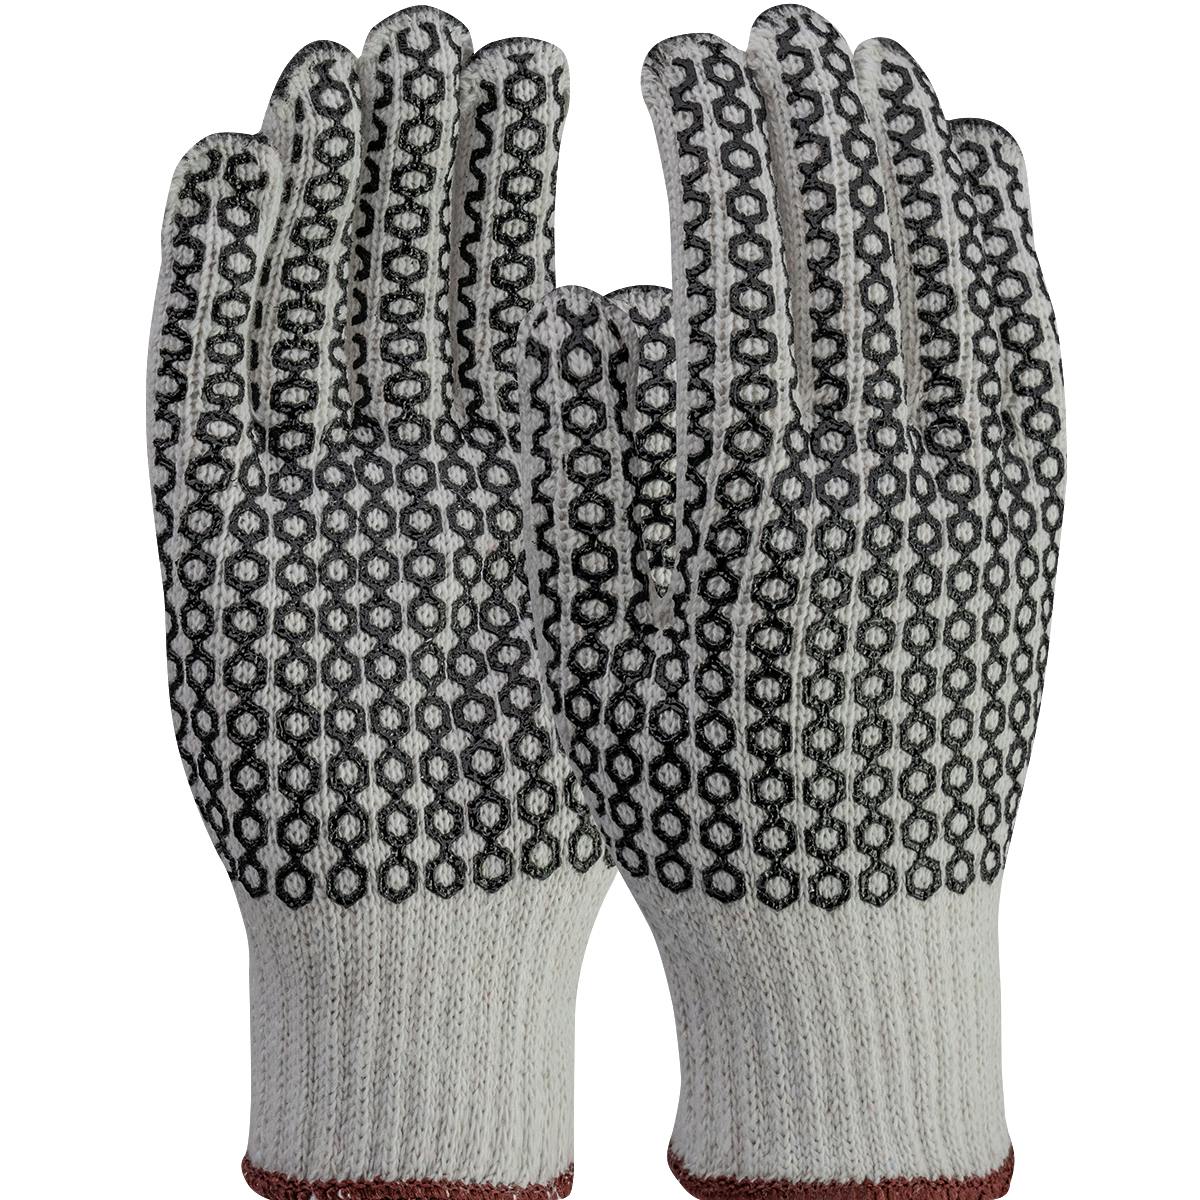 PIP® Regular Weight Seamless Knit Cotton/Polyester Glove with PVC Honeycomb Grip - Double-Sided (K708SKHW)